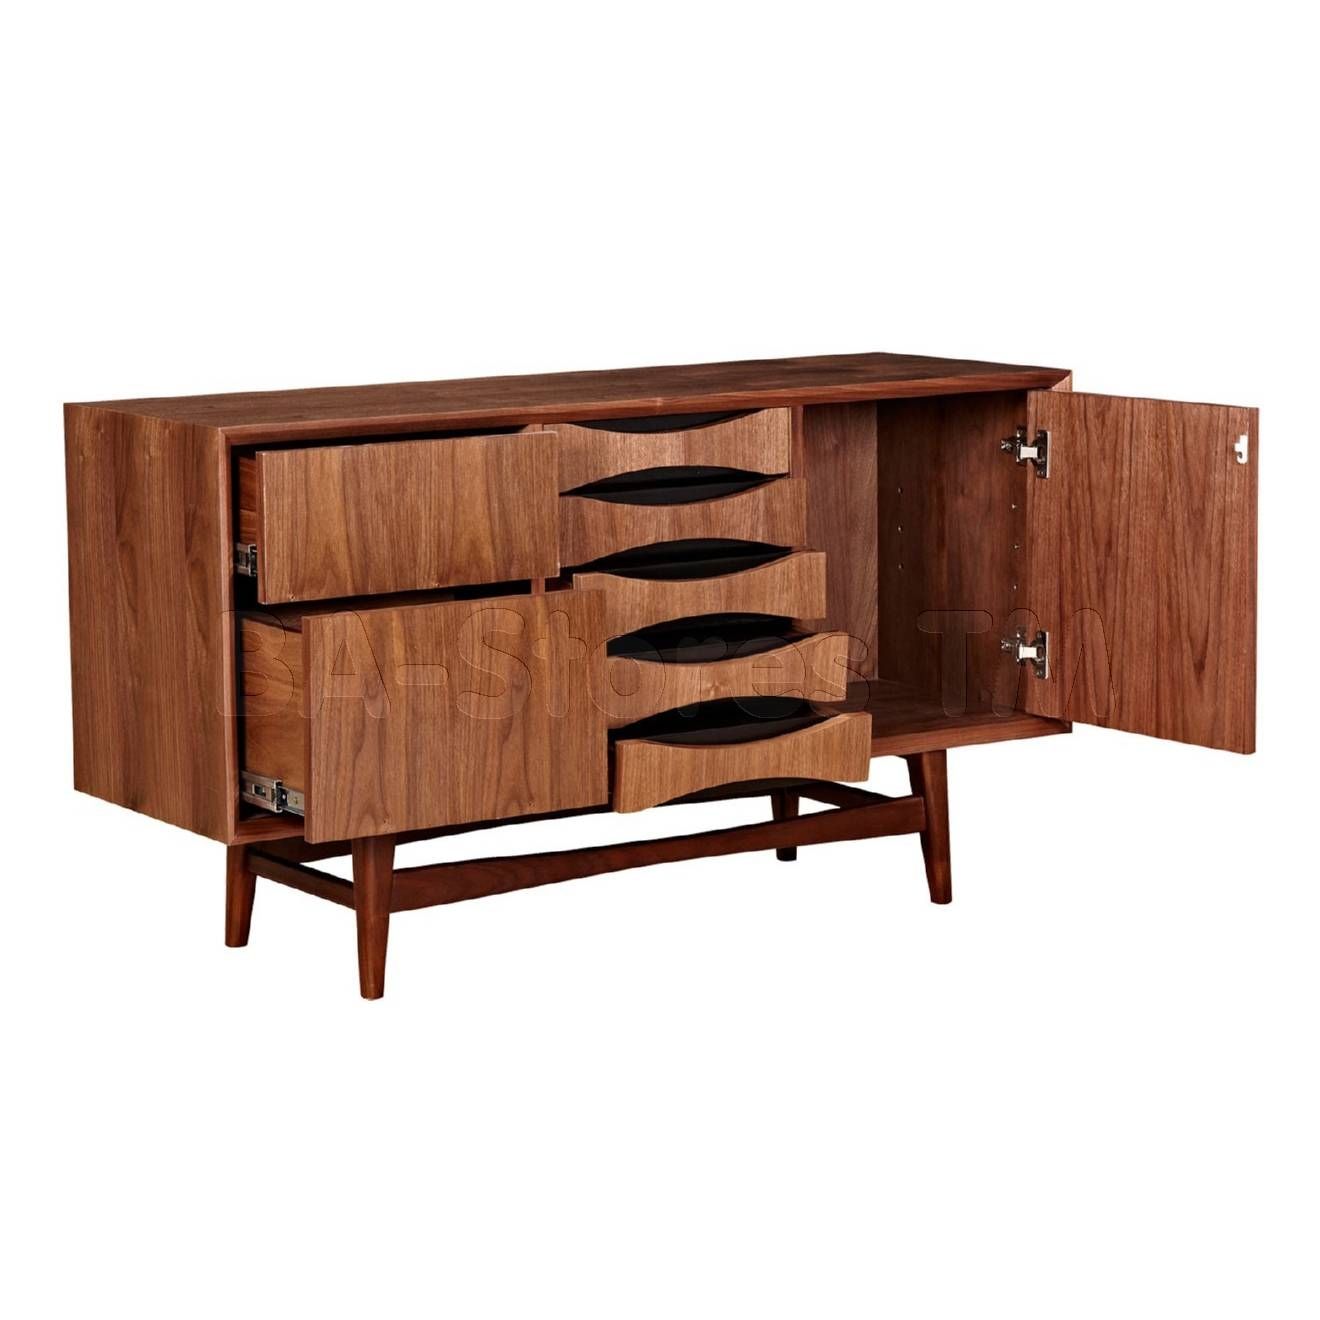 China, Buffets And Cabinets: Hanna Sideboard | Walnut & Black Pertaining To Walnut And Black Sideboards (View 6 of 15)